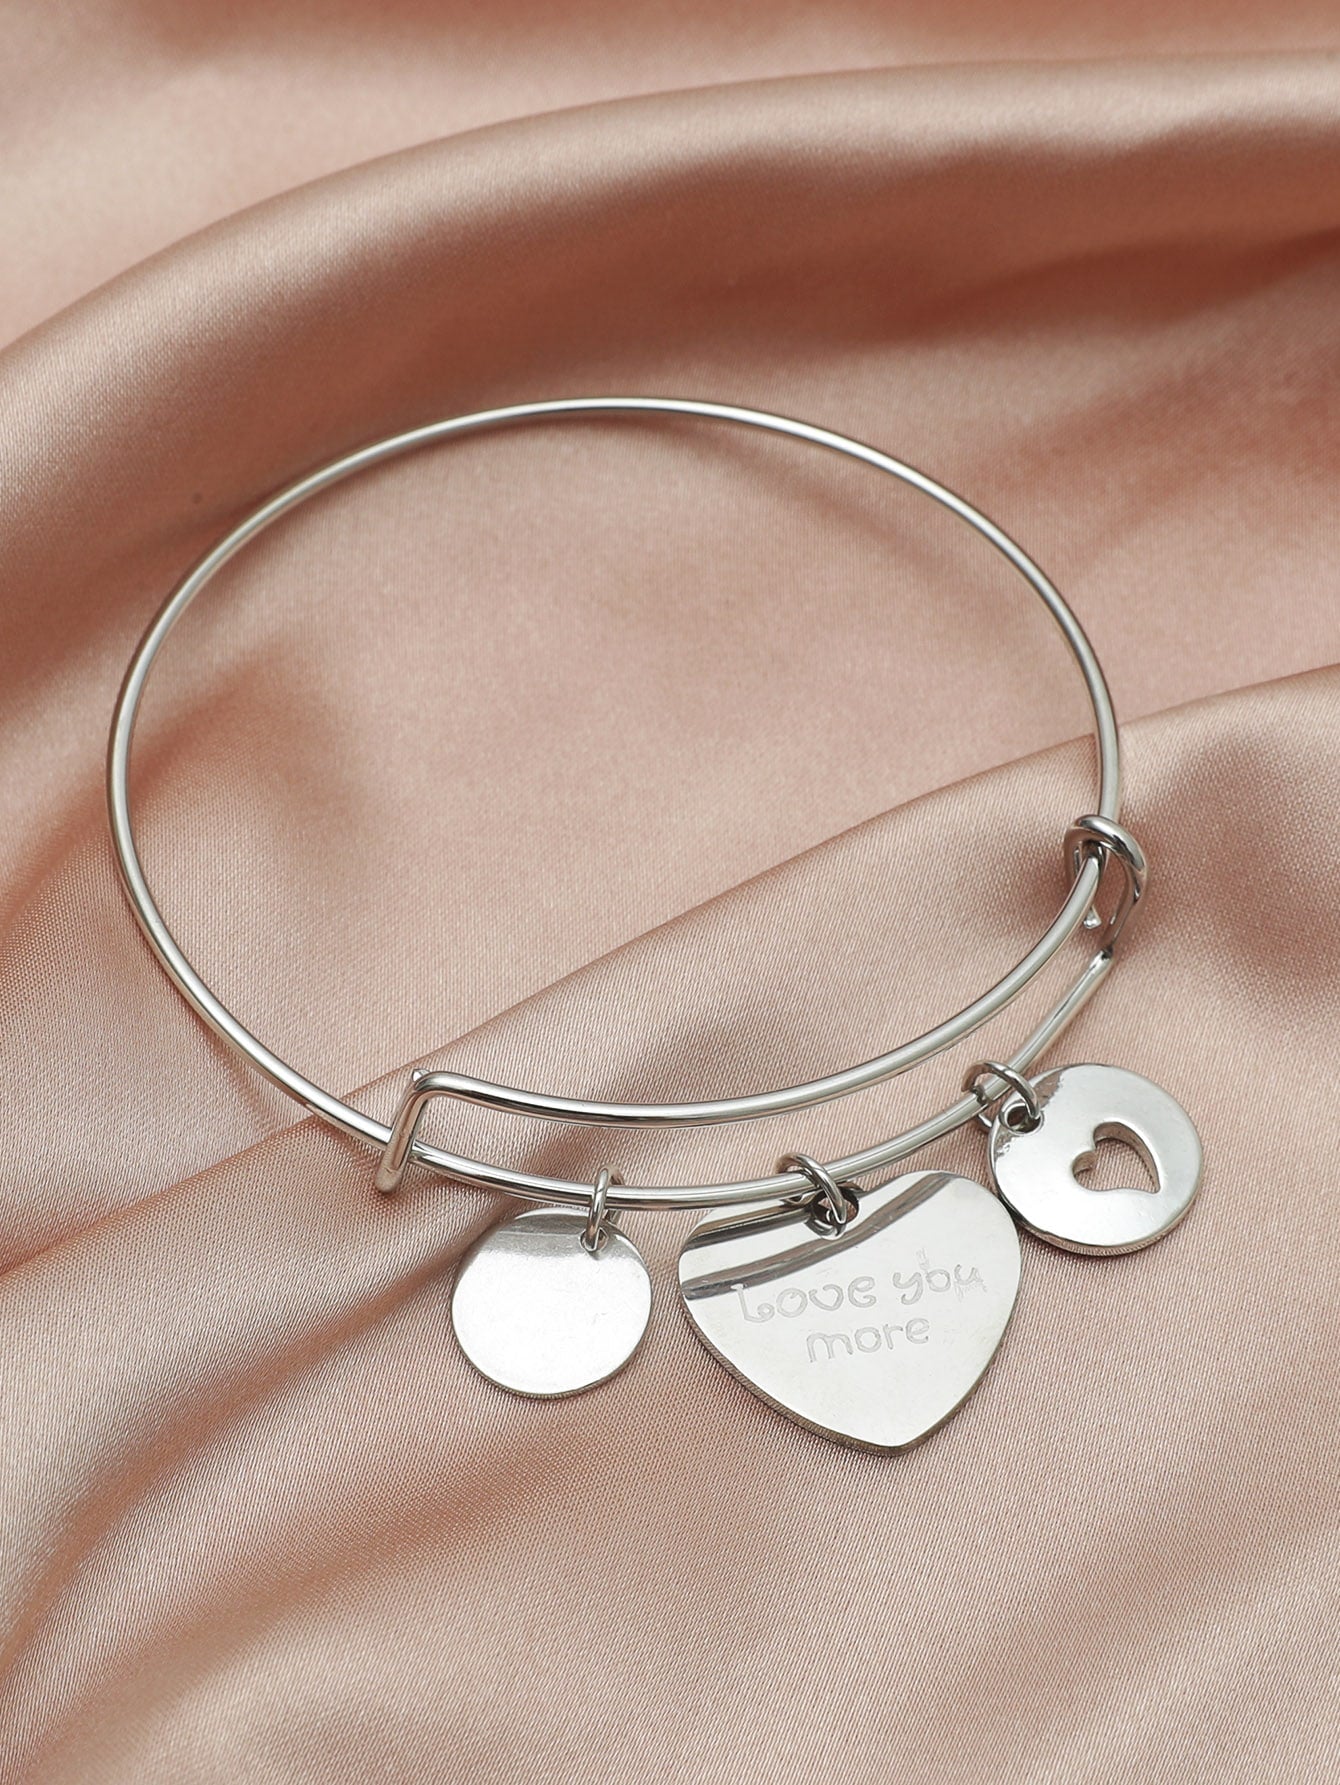 Heart Charm Bangle Bracelet for Women Jewelry Gifts for Her Fash